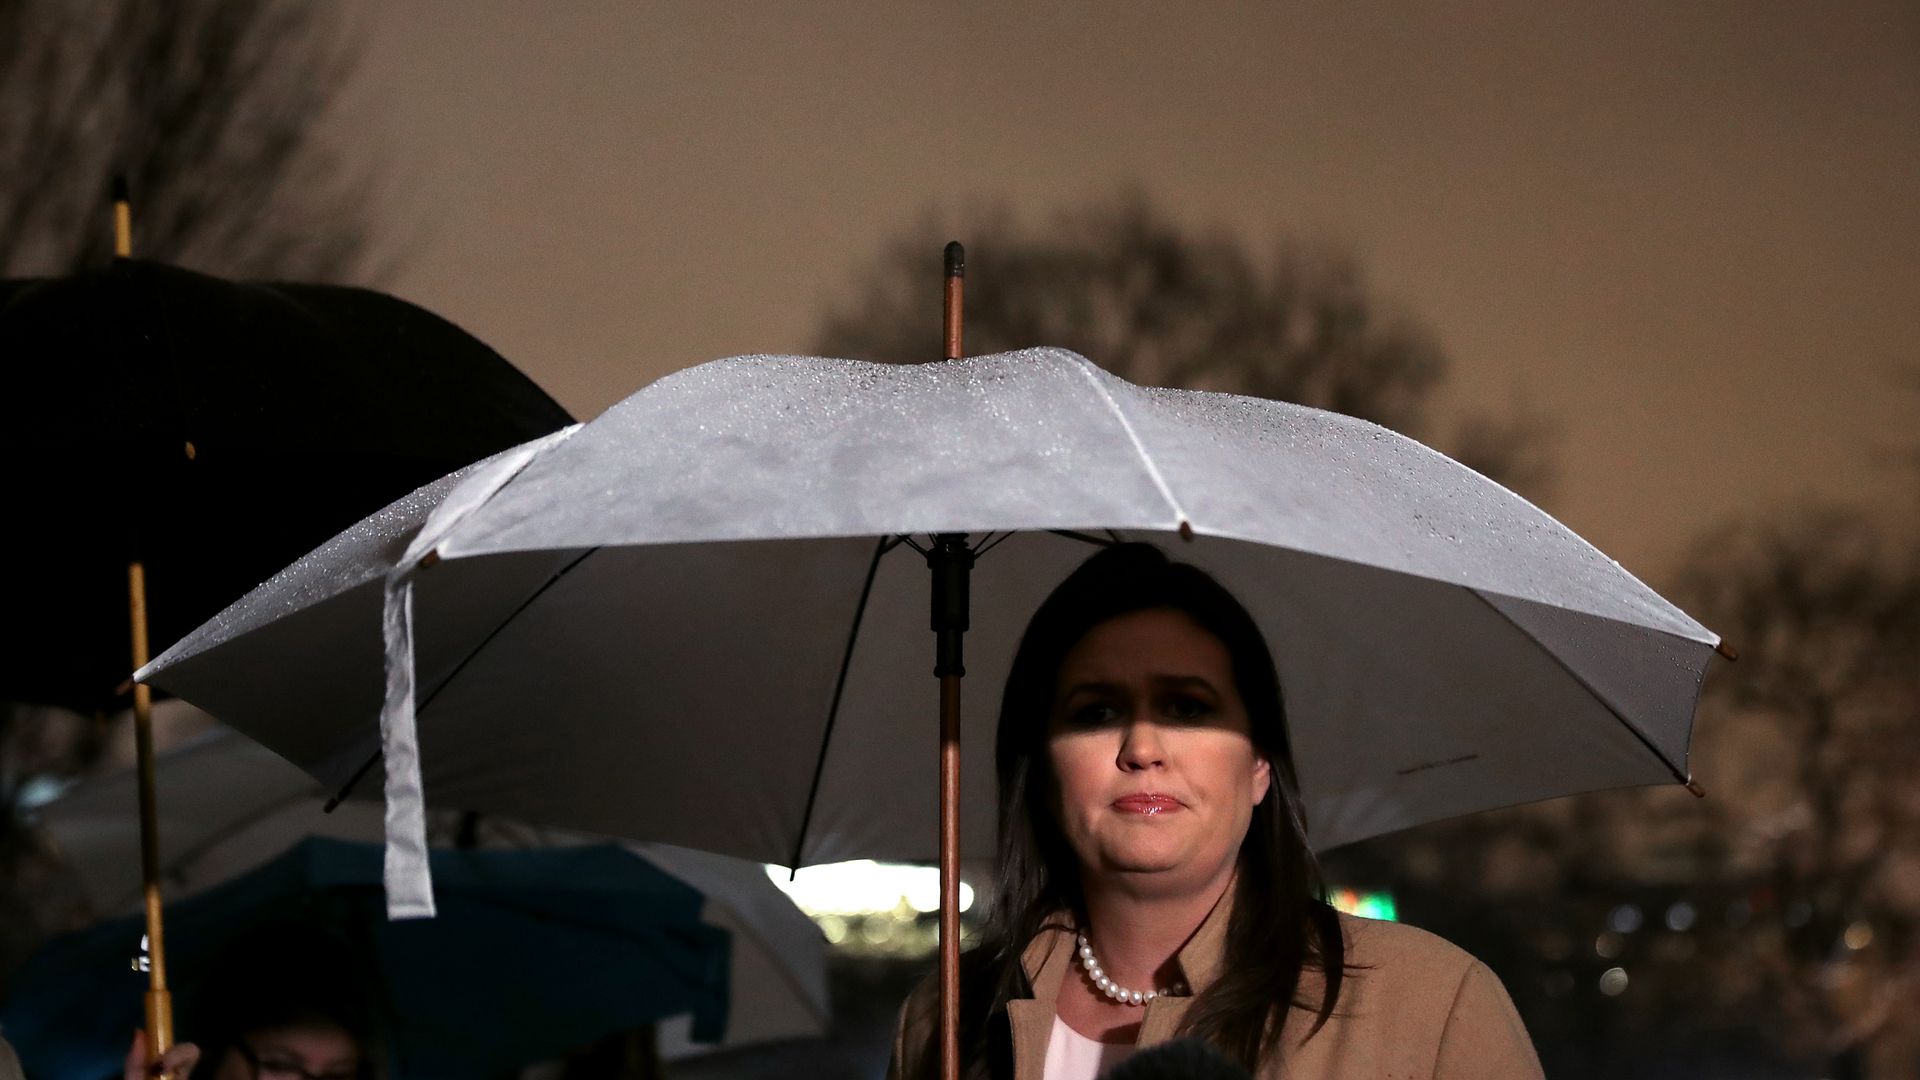 Sarah Sanders holding an umbrella over her head so that it shades part of her eyes